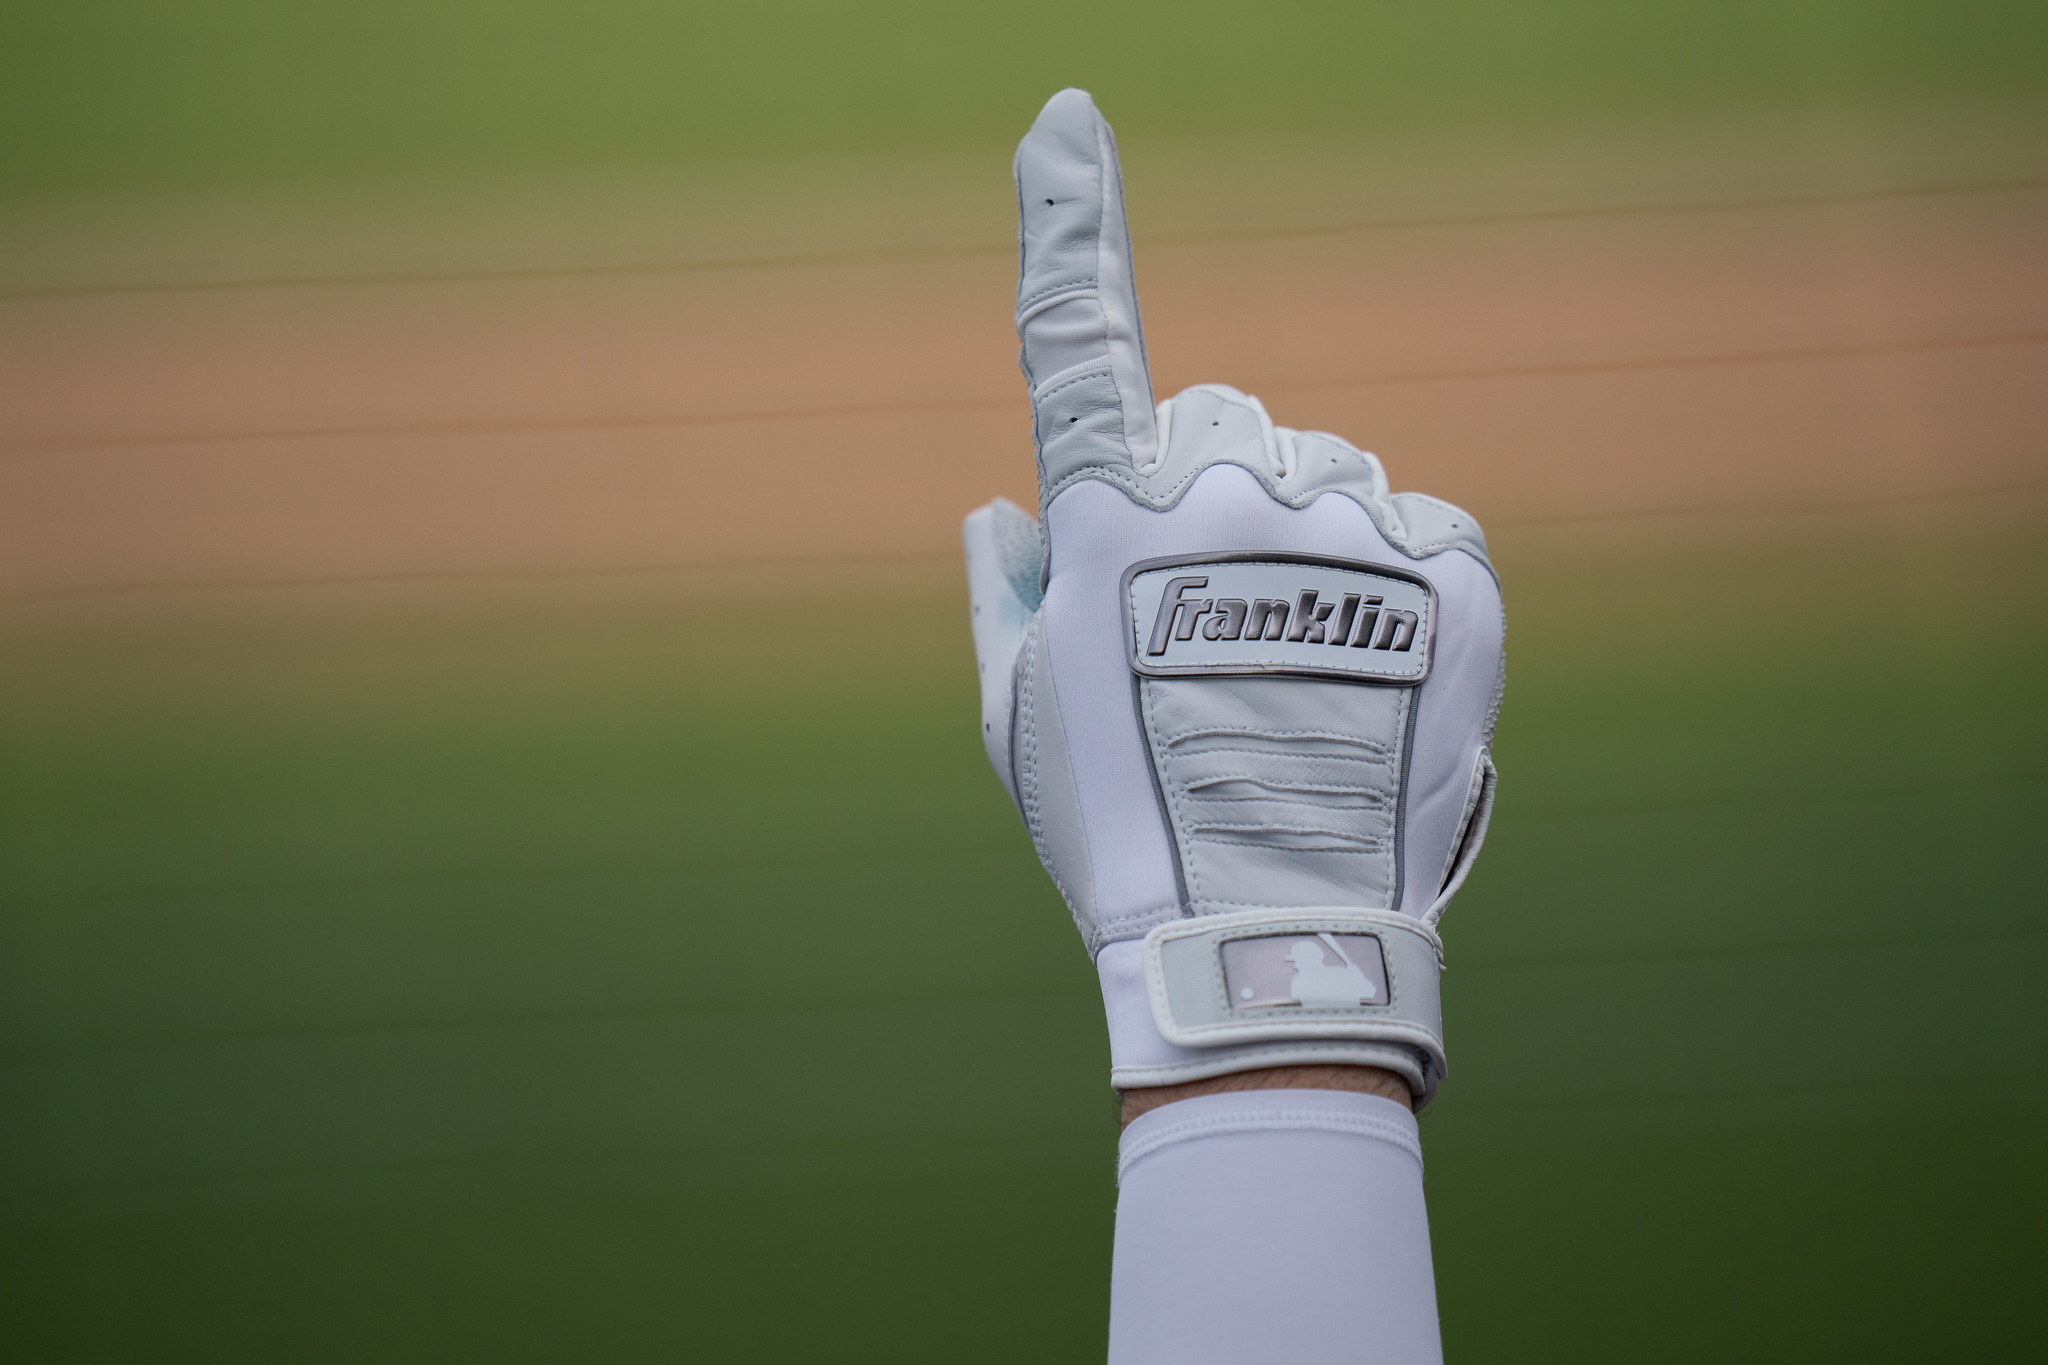 A hand clad in a white Franklin brand batting glove with silver accents points up in the air, and is the only thing visible against a distant backdrop of the green grass and brown dirt of a baseball diamond.